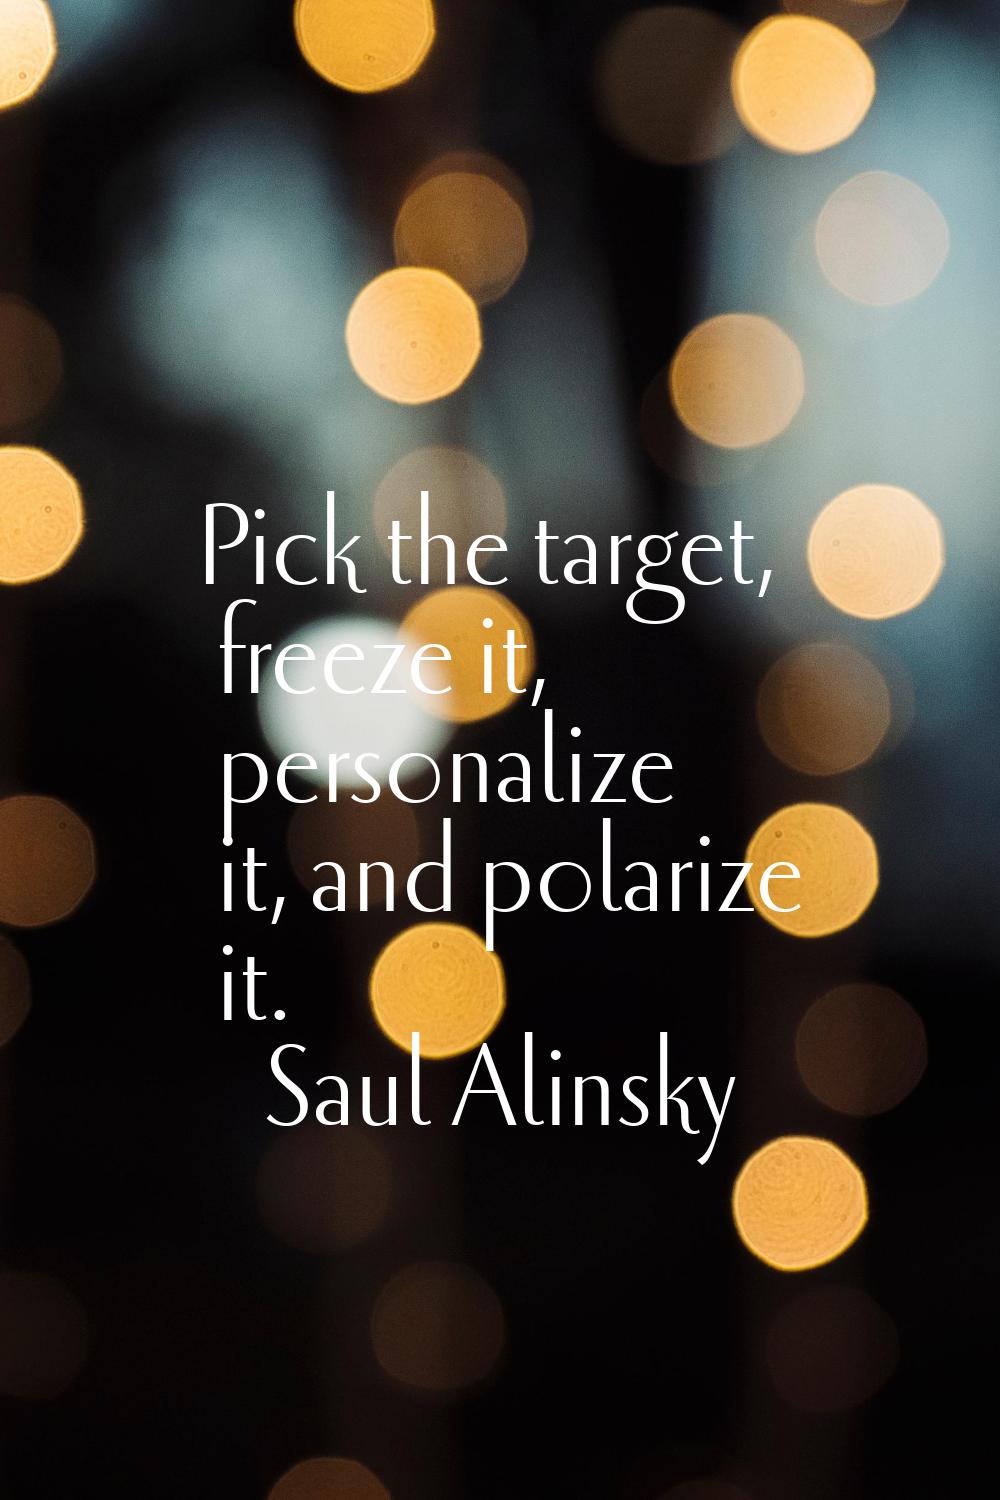 Pick the target, freeze it, personalize it, and polarize it.